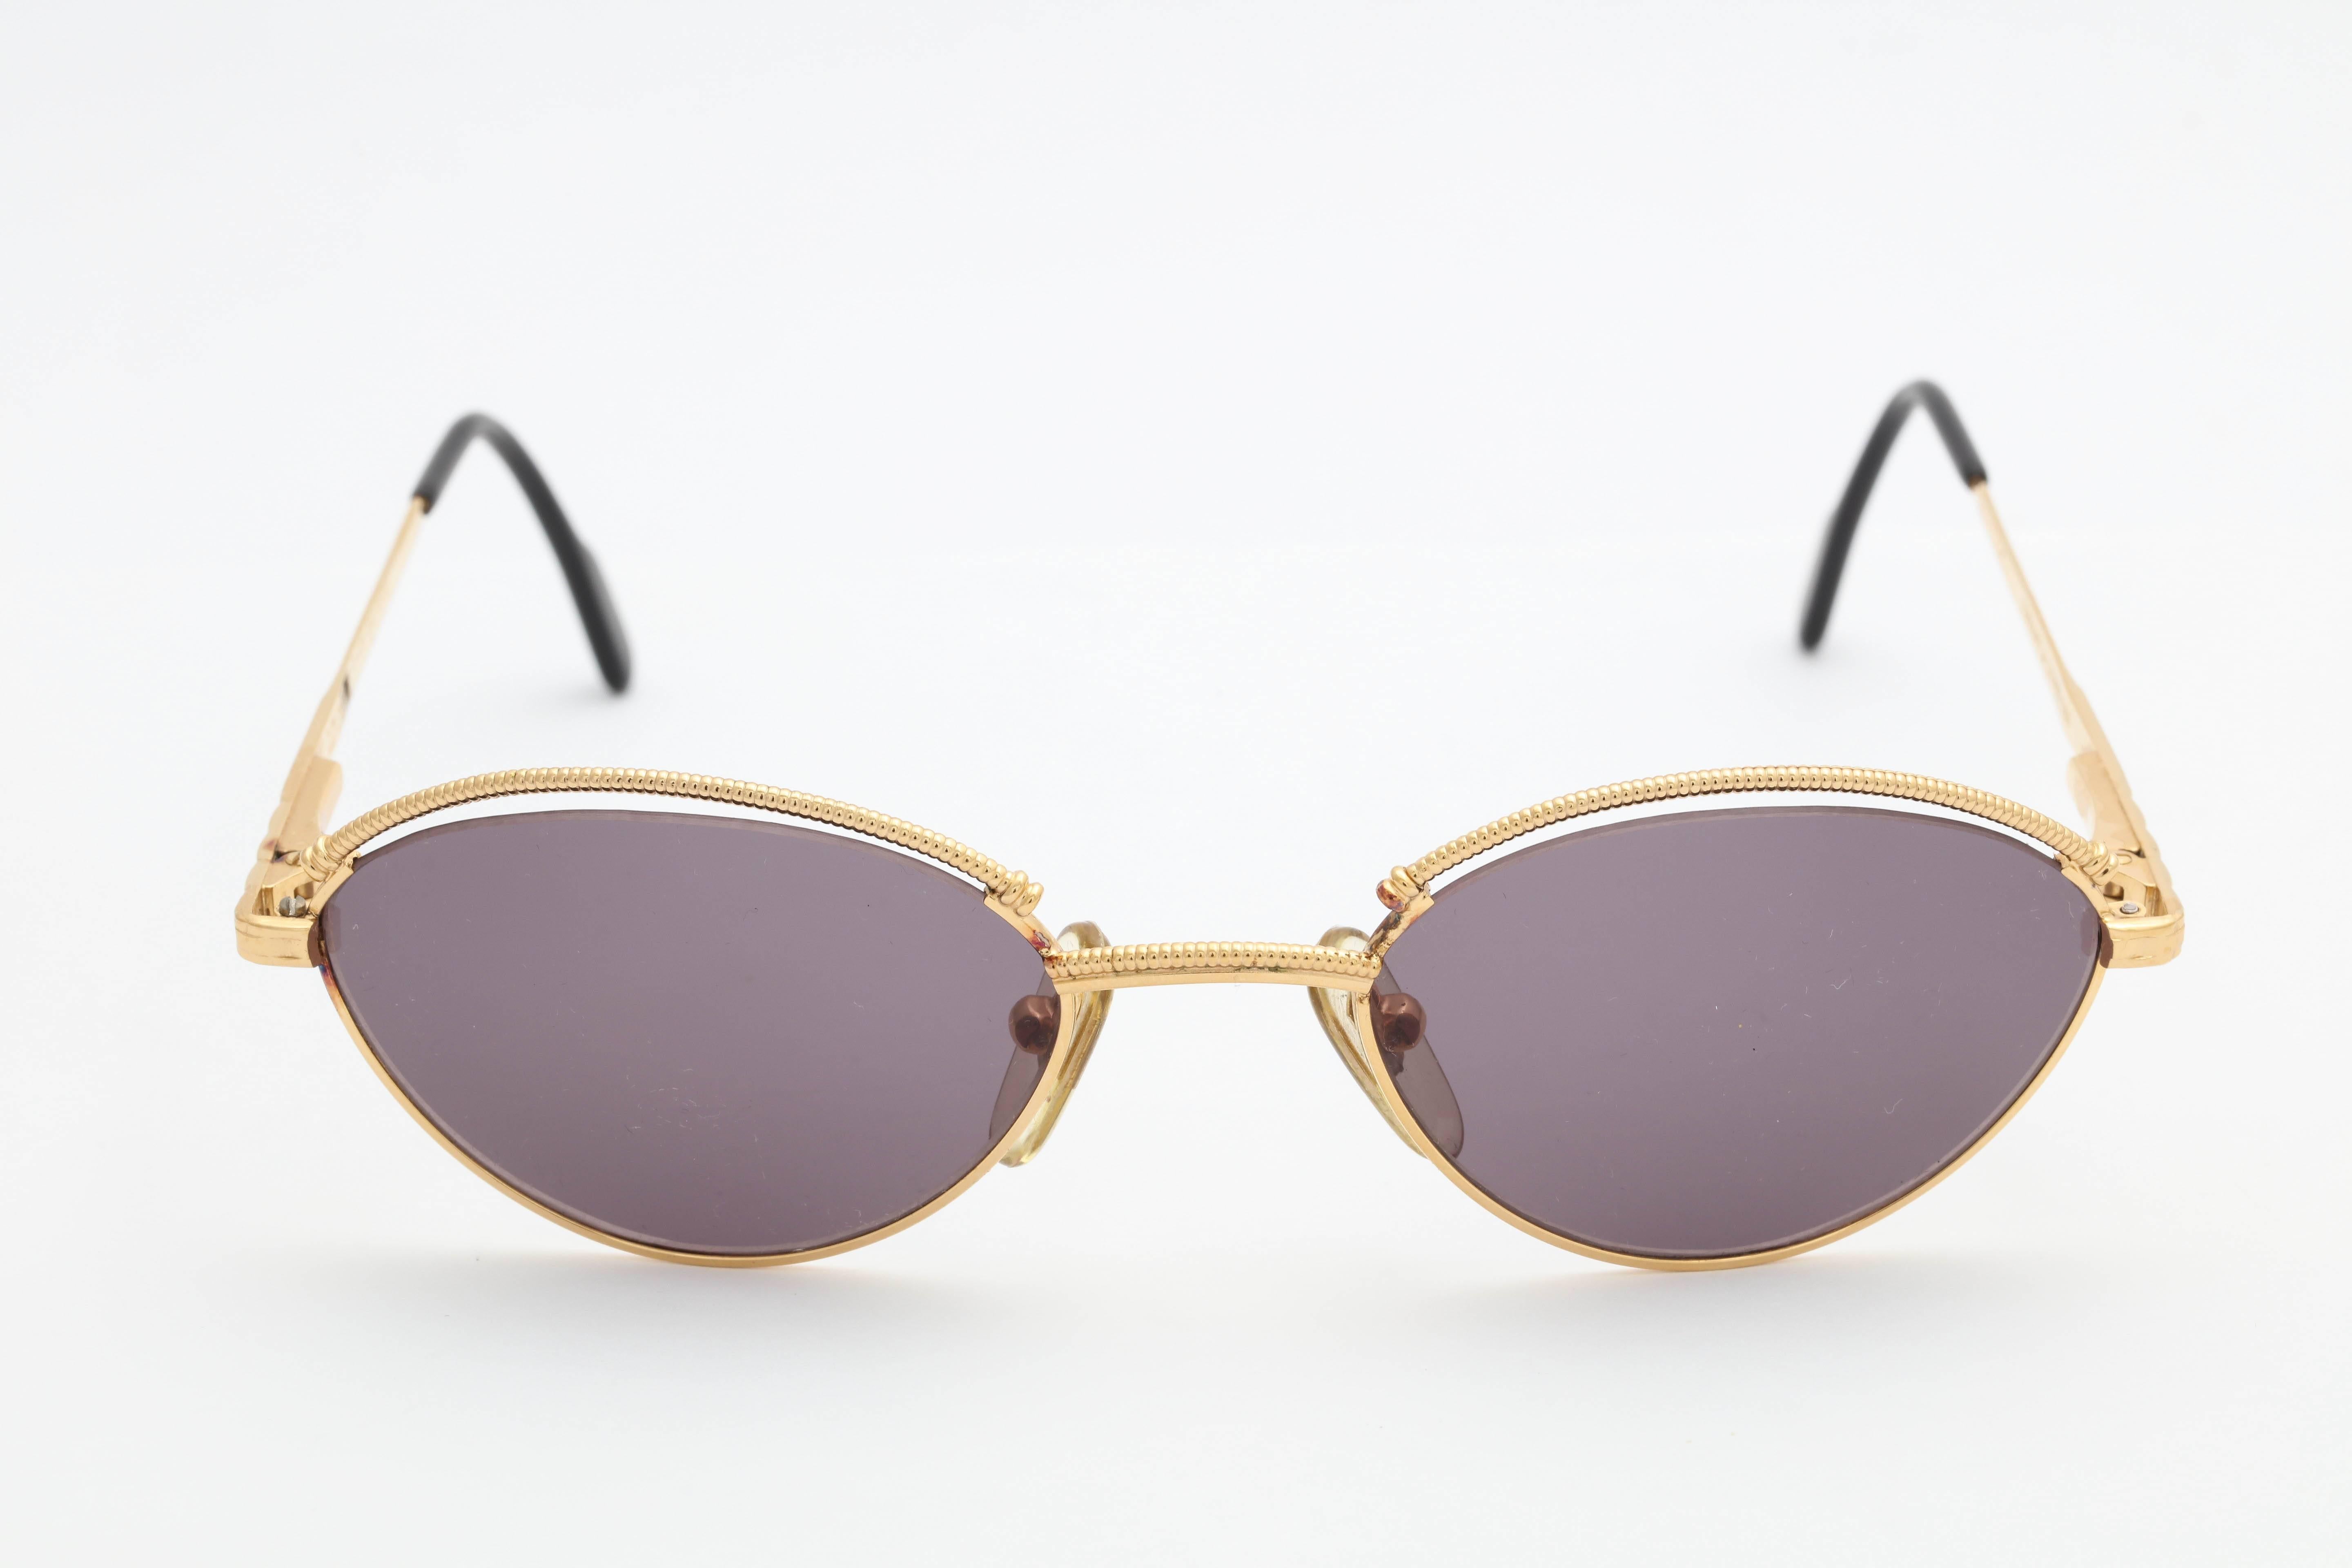 Tiffany & Co. Gold Plated Vintage Sunglasses T416 23K  In Excellent Condition For Sale In Chicago, IL